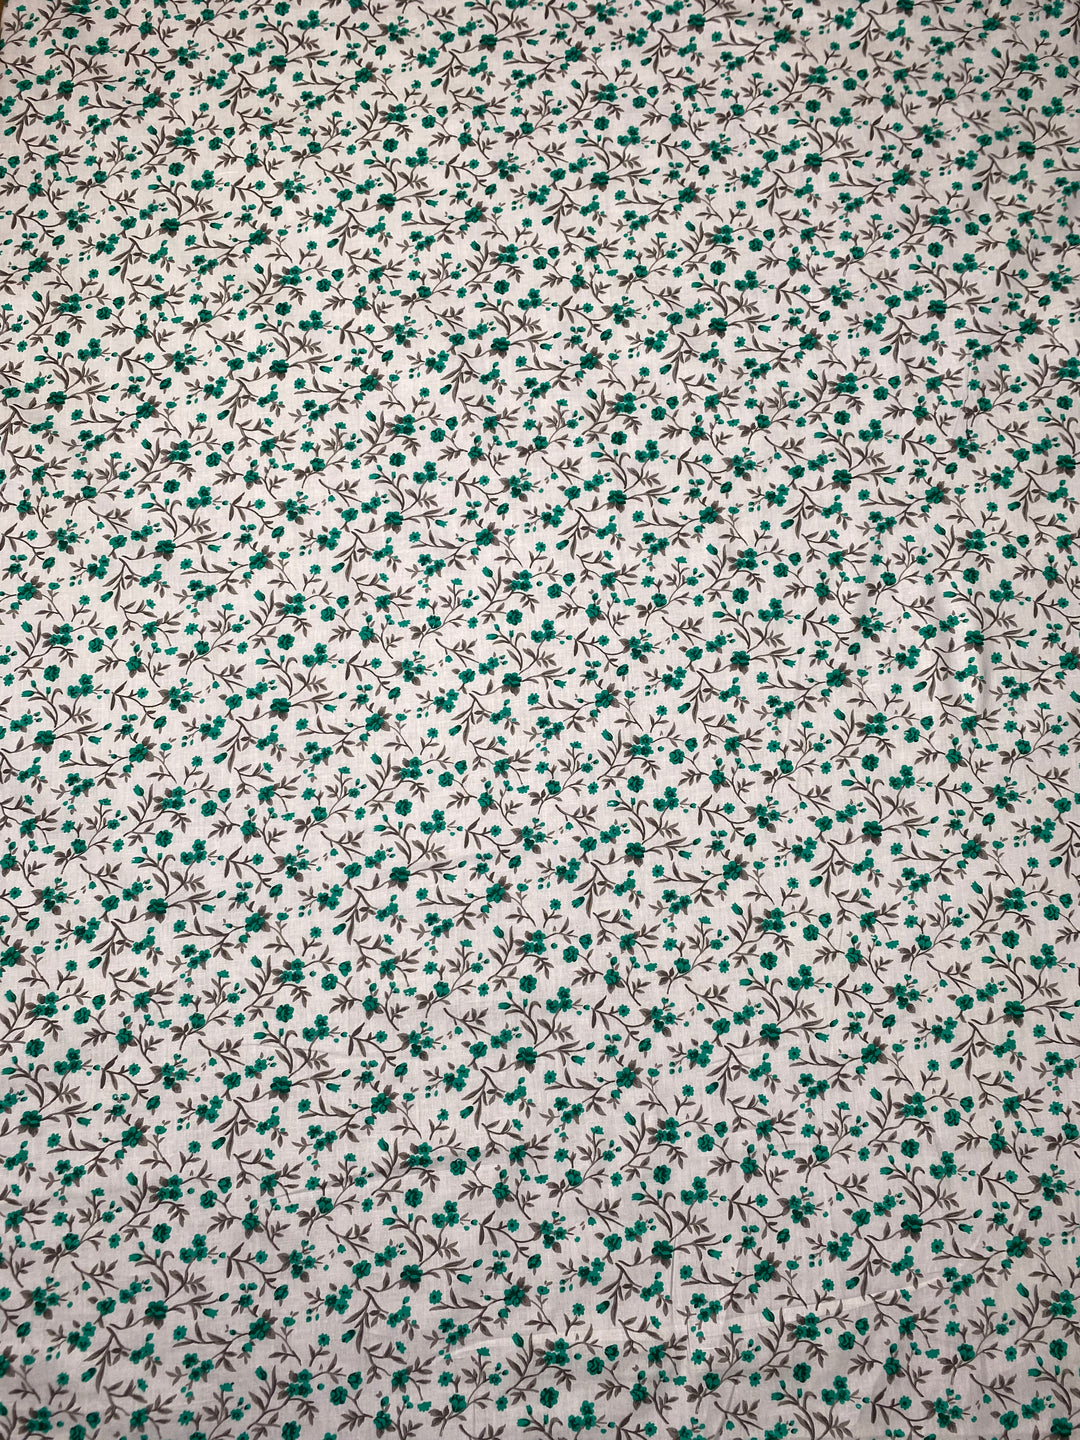 Printed Floral Cotton Fabric White